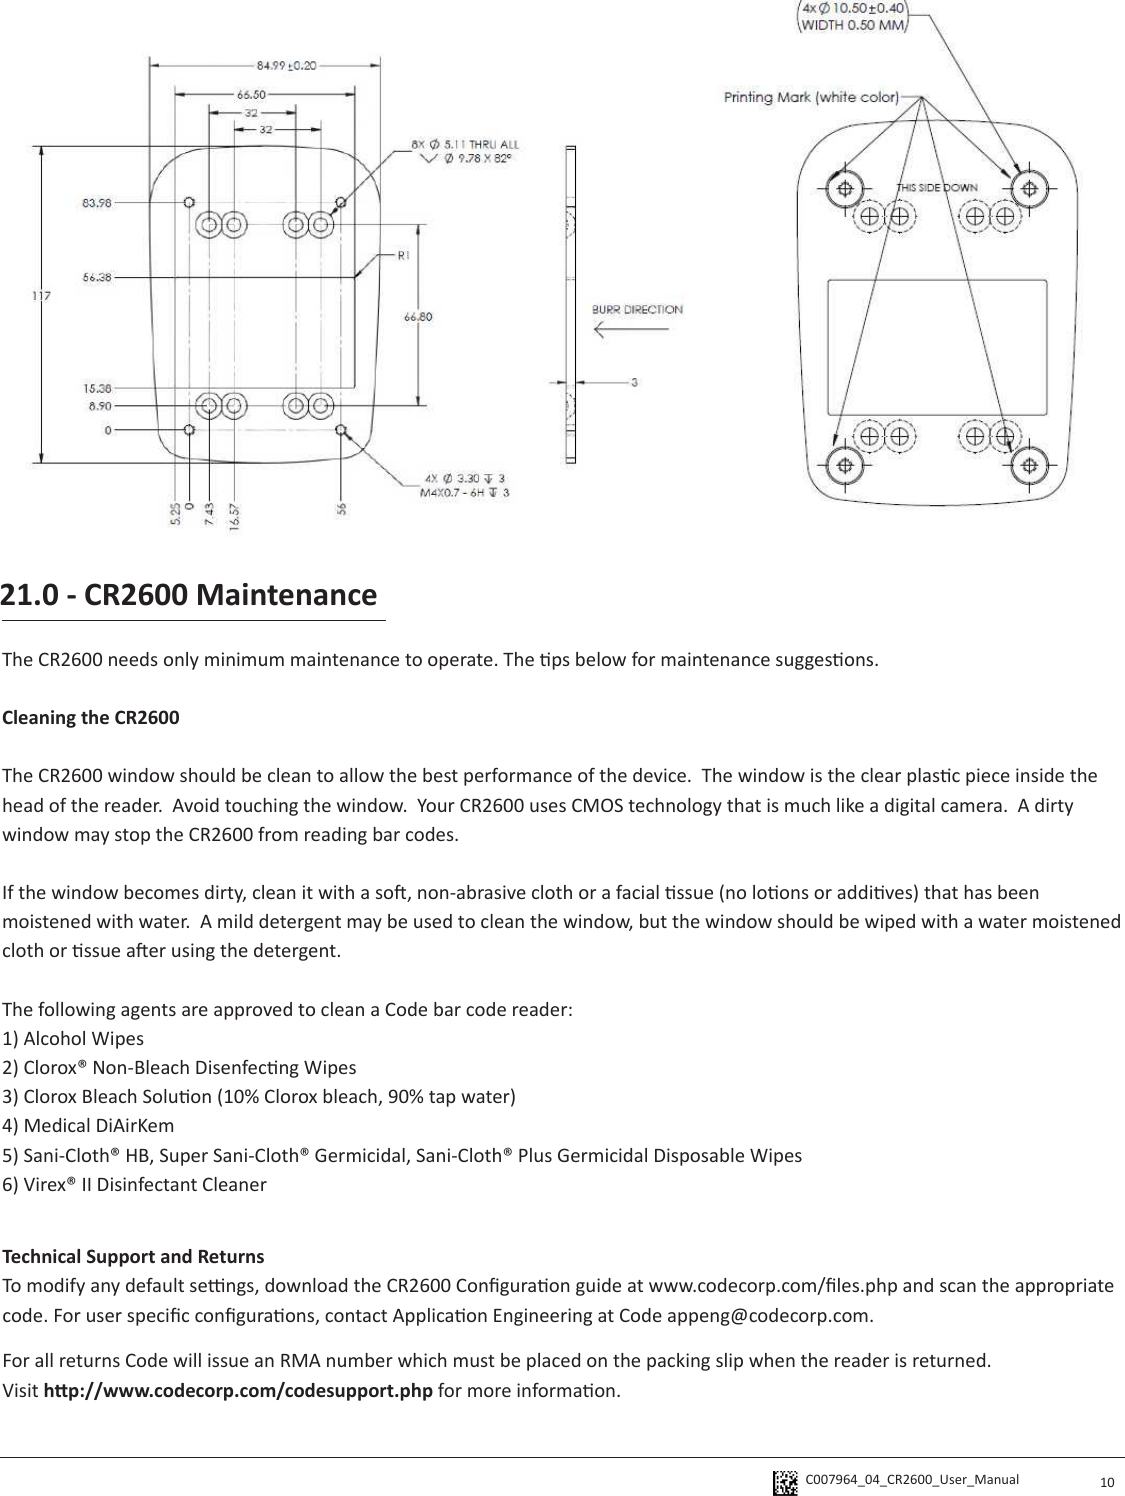 C007964_04_CR2600_User_Manual  10The CR2600 needs only minimum maintenance to operate. The ps below for maintenance suggesons.Cleaning the CR2600 The CR2600 window should be clean to allow the best performance of the device.  The window is the clear plasc piece inside the head of the reader.  Avoid touching the window.  Your CR2600 uses CMOS technology that is much like a digital camera.  A dirty window may stop the CR2600 from reading bar codes.  If the window becomes dirty, clean it with a so, non-abrasive cloth or a facial ssue (no loons or addives) that has been moistened with water.  A mild detergent may be used to clean the window, but the window should be wiped with a water moistened cloth or ssue aer using the detergent.The following agents are approved to clean a Code bar code reader:1) Alcohol Wipes2) Clorox® Non-Bleach Disenfecng Wipes3) Clorox Bleach Soluon (10% Clorox bleach, 90% tap water)4) Medical DiAirKem5) Sani-Cloth® HB, Super Sani-Cloth® Germicidal, Sani-Cloth® Plus Germicidal Disposable Wipes6) Virex® II Disinfectant Cleaner21.0 - CR2600 MaintenanceTechnical Support and ReturnsTo modify any default sengs, download the CR2600 Conguraon guide at www.codecorp.com/les.php and scan the appropriate code. For user specic conguraons, contact Applicaon Engineering at Code appeng@codecorp.com.For all returns Code will issue an RMA number which must be placed on the packing slip when the reader is returned.  Visit hp://www.codecorp.com/codesupport.php for more informaon.